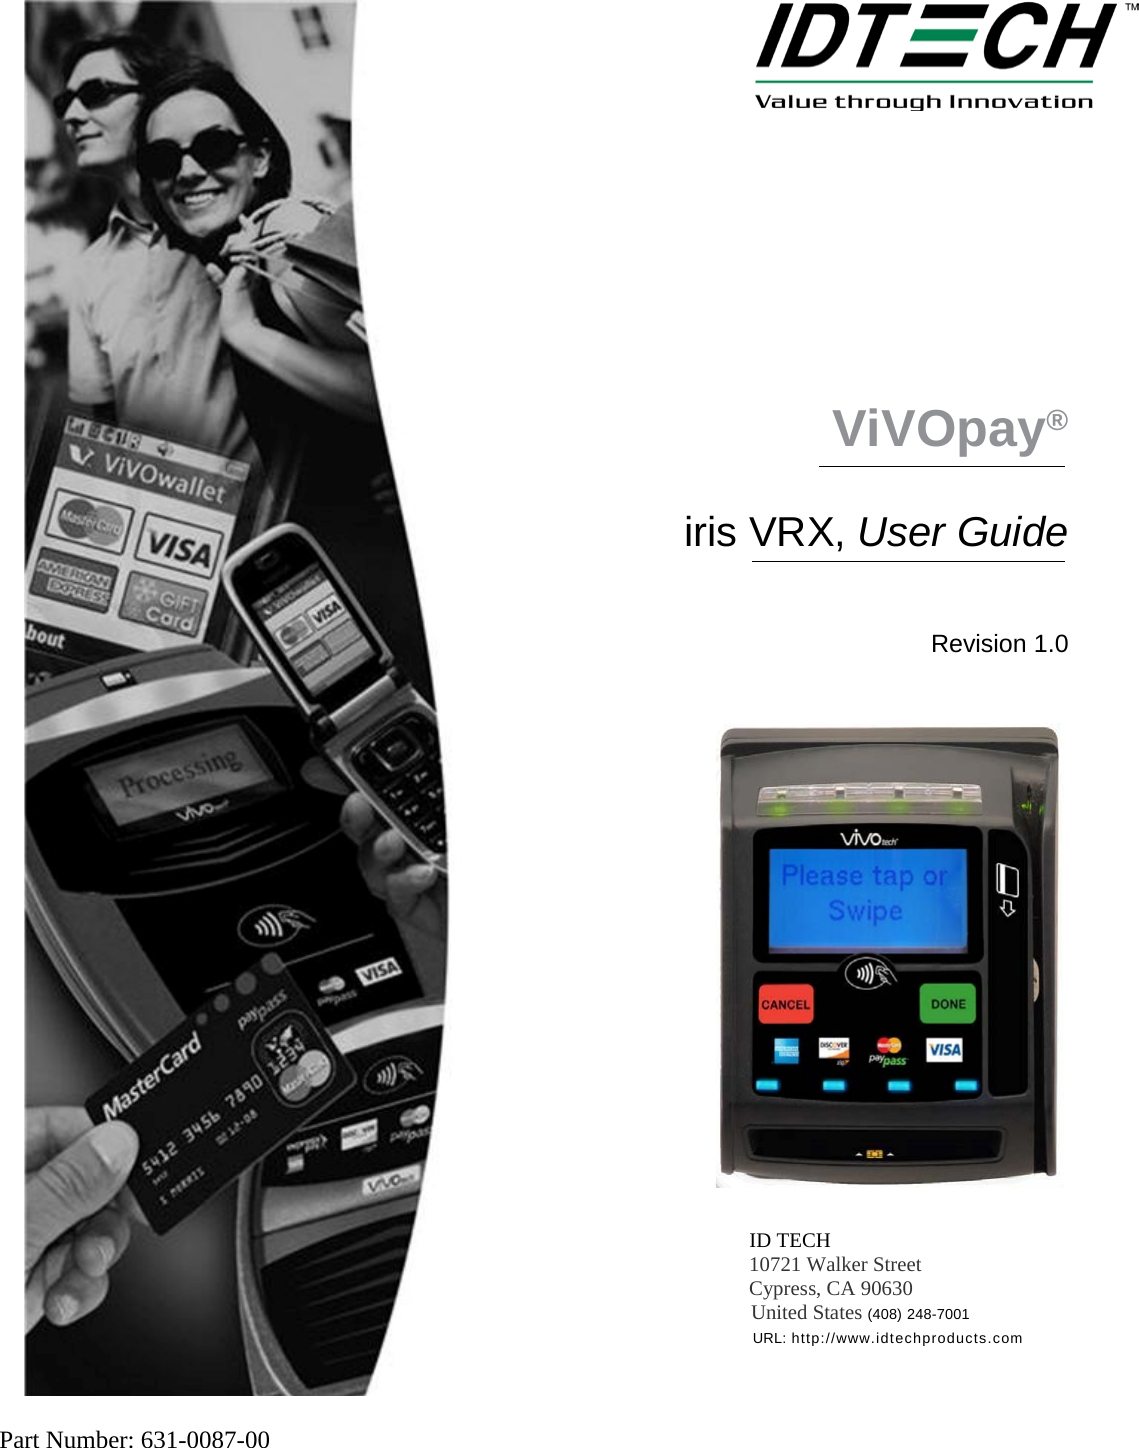 Part Number: 631-0087-00                   ViVOpay®   iris VRX, User Guide     Revision 1.0       ID TECH 10721 Walker Street Cypress, CA 90630           United States (408) 248-7001                           URL: http://www.idtechproducts.com 